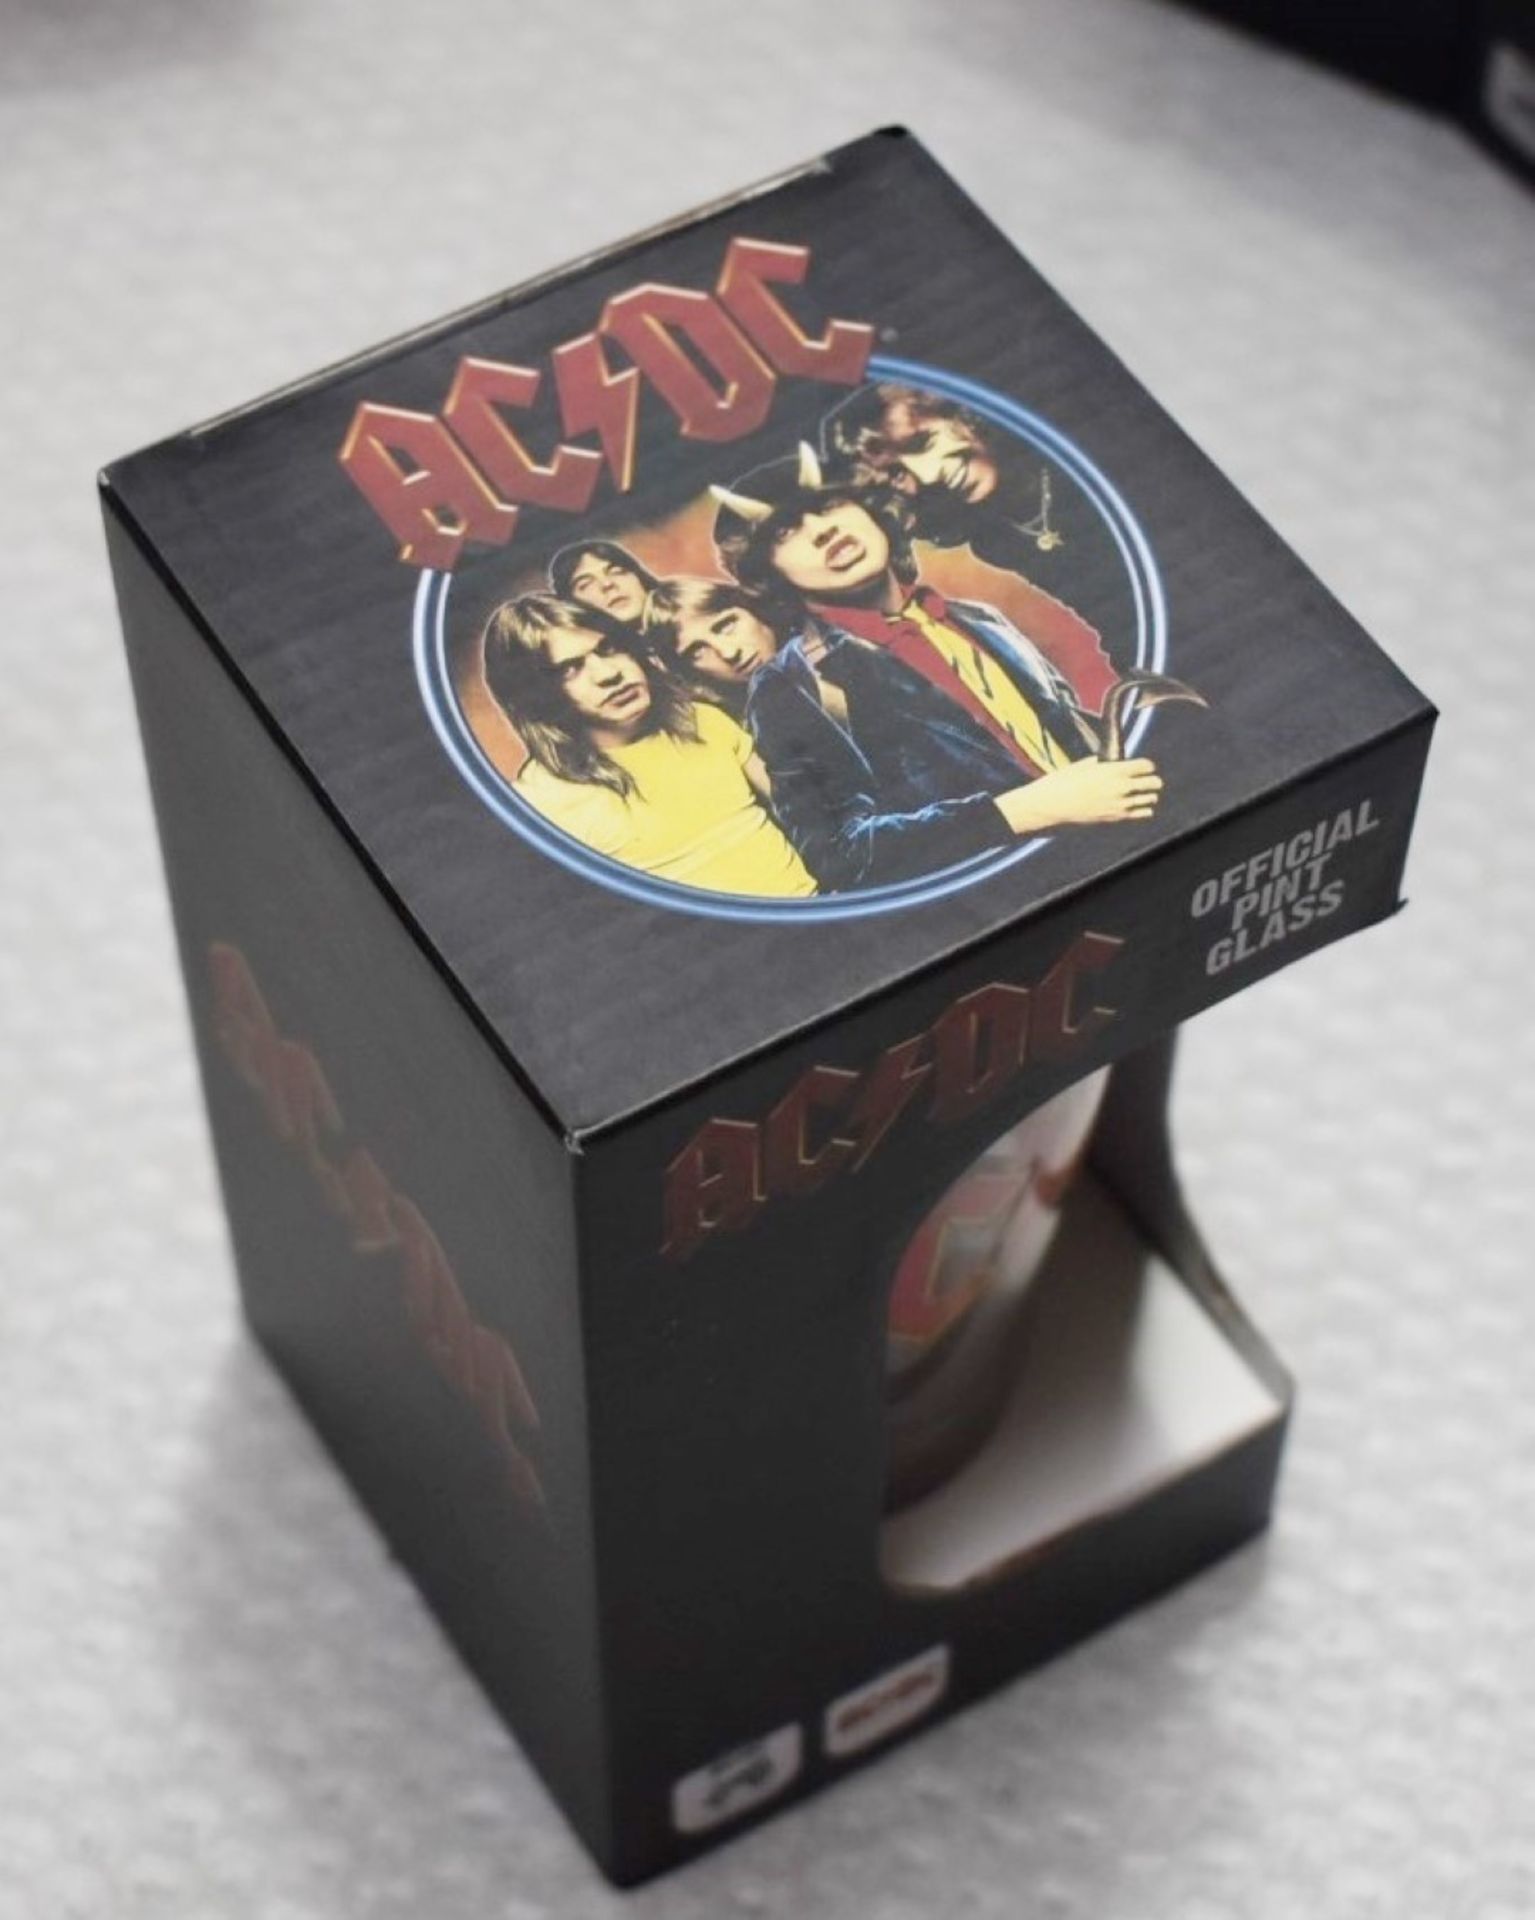 4 x Official ACDC Pint Glasses - Presented in Retail Packaging - Officially Licensed Merchandise - - Image 5 of 7